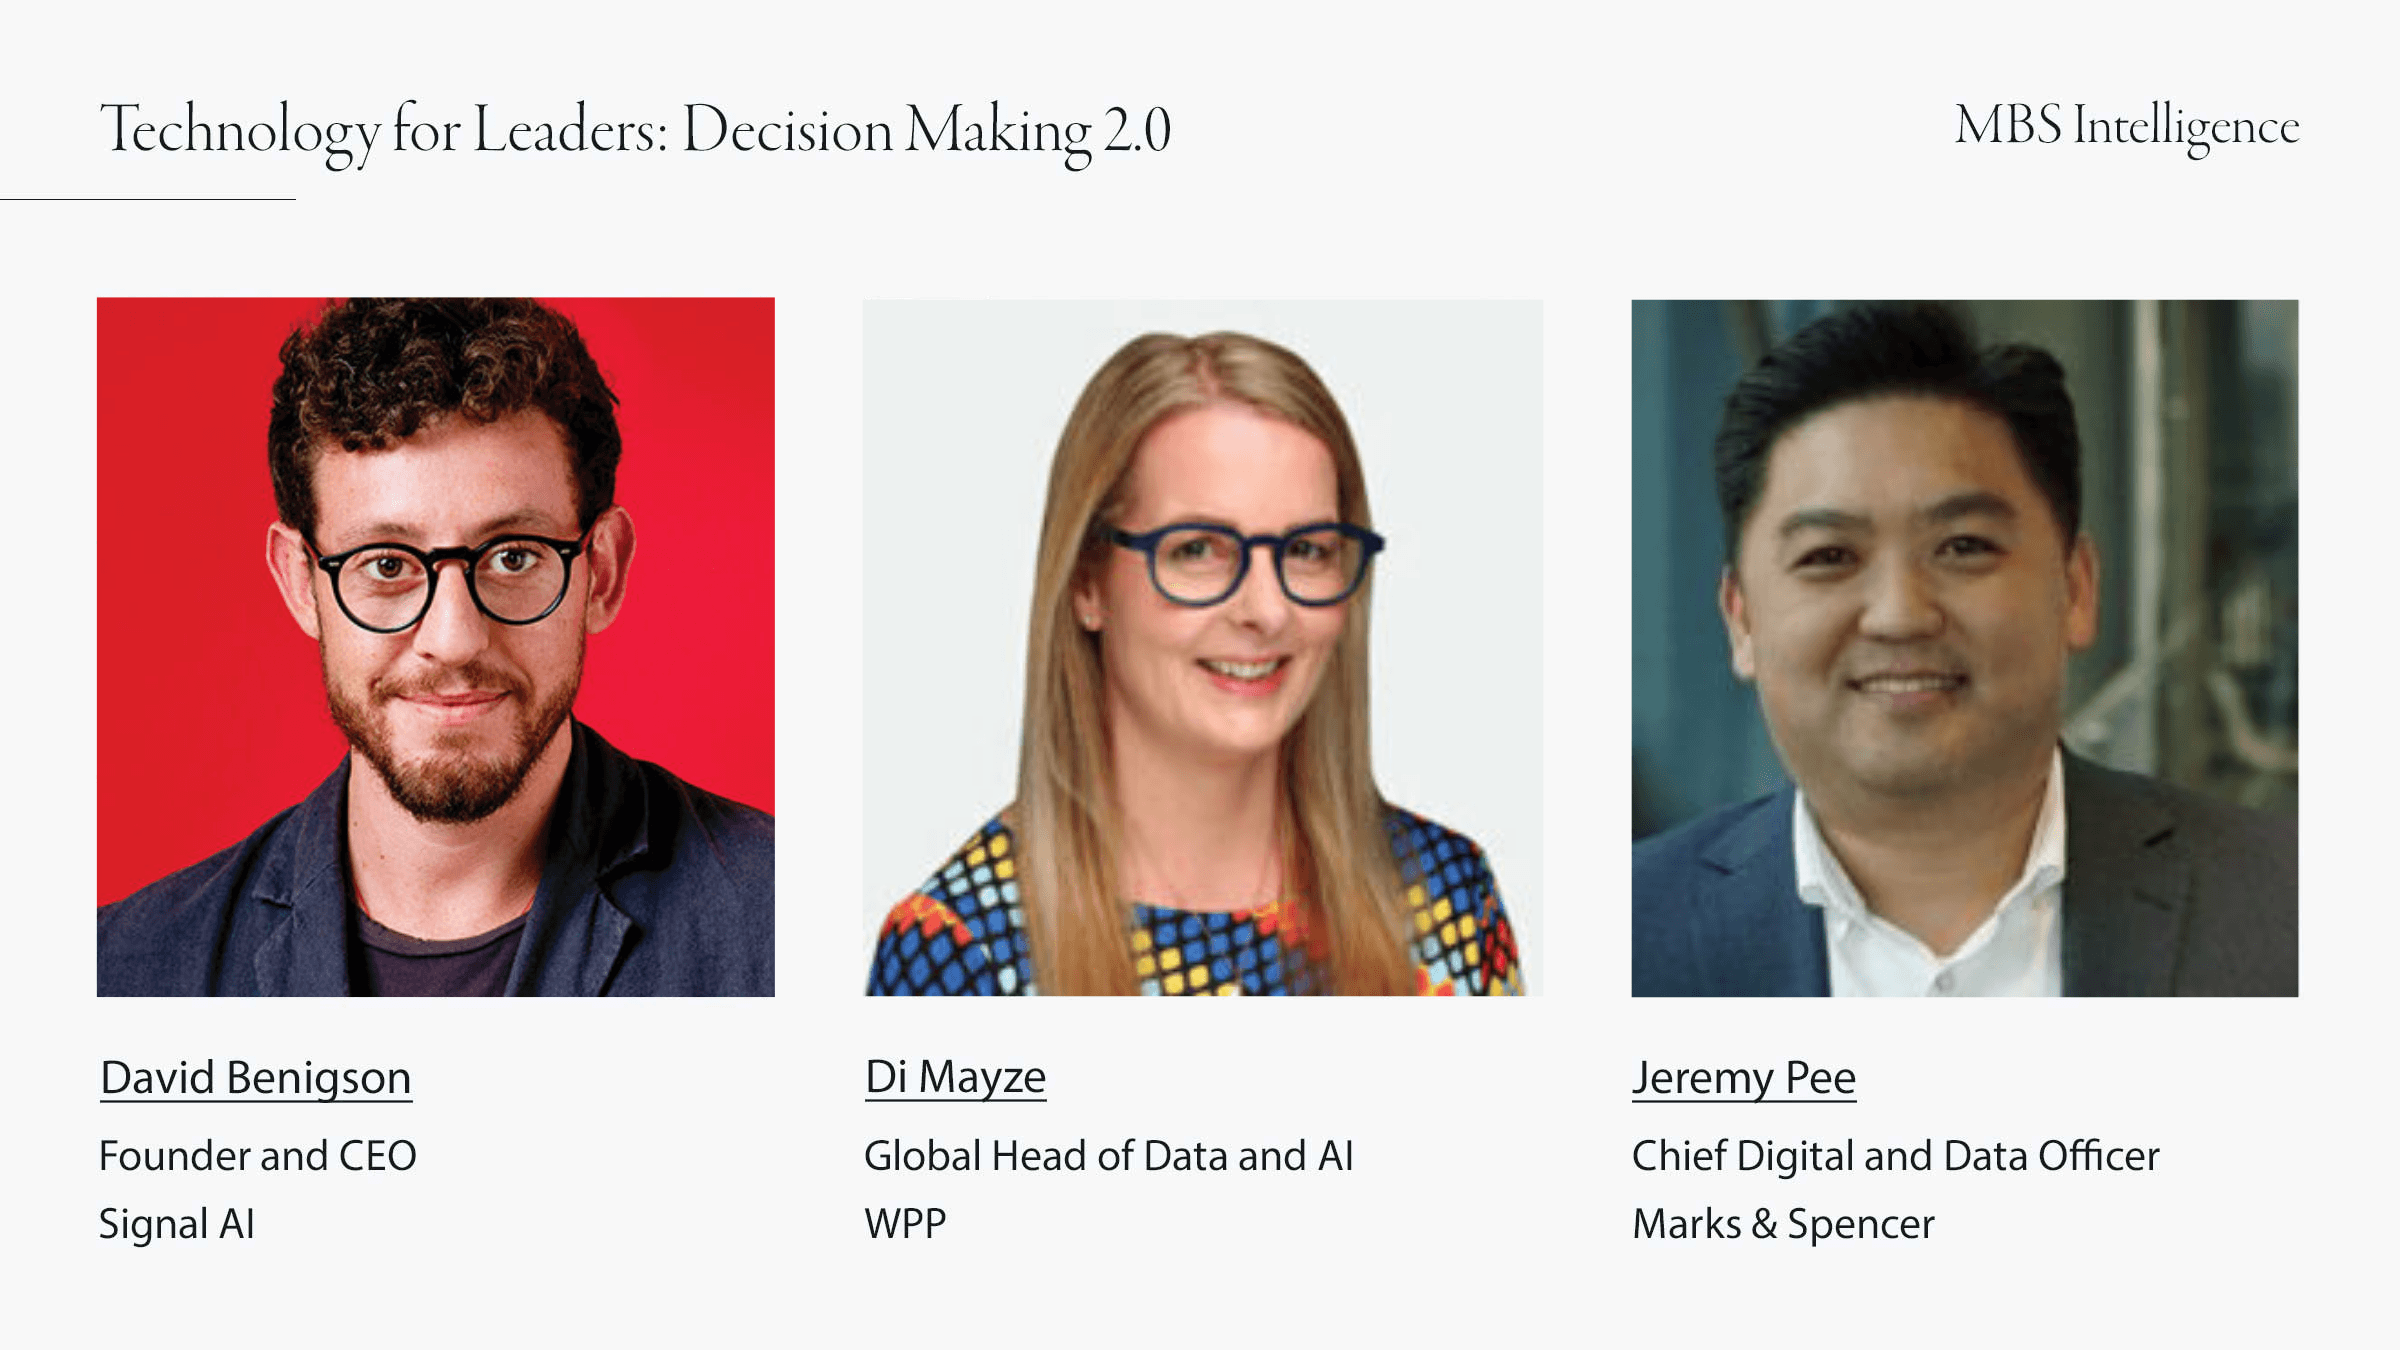 David Benigson, founder and CEO at Signal AI, Di Mayze, Global Head of Data and AI at WPP, and Jeremy Pee, Chief Digital and Data Officer at Marks & Spencer